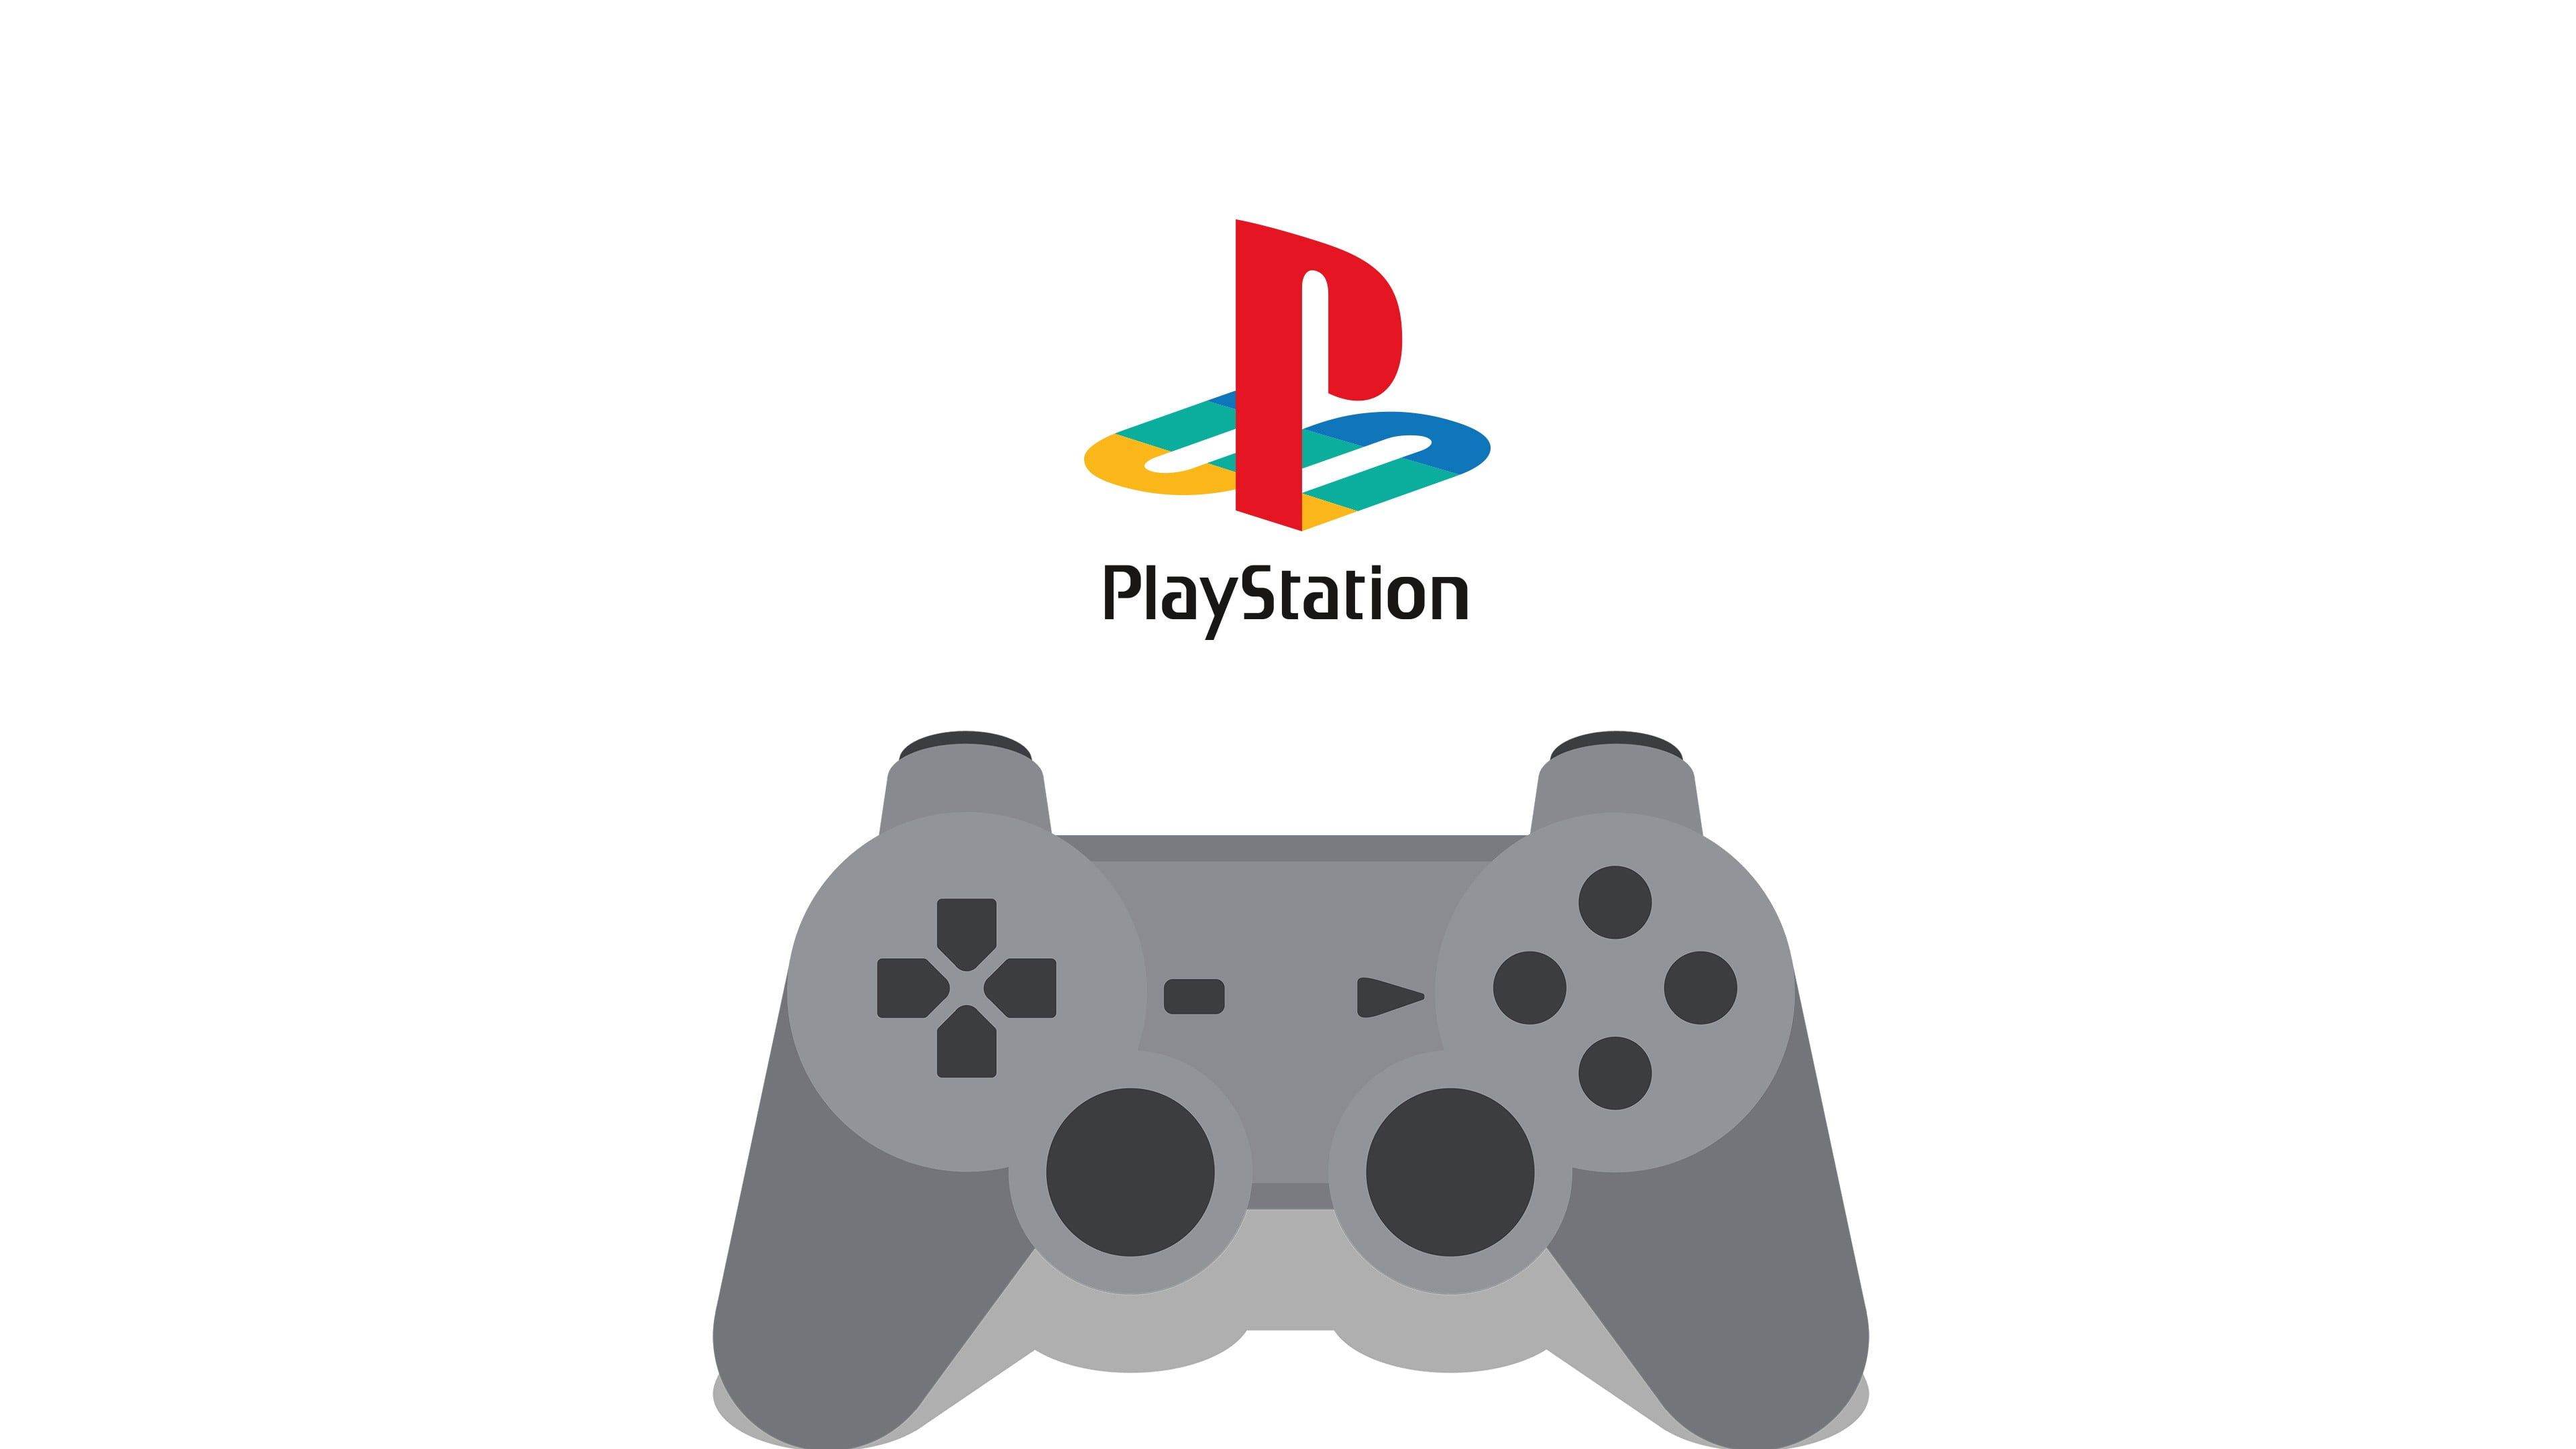 HD wallpaper: Sony PlayStation logo, video games, minimalism, controllers, simple background. Playstation logo, Ps vita wallpaper, Playstation